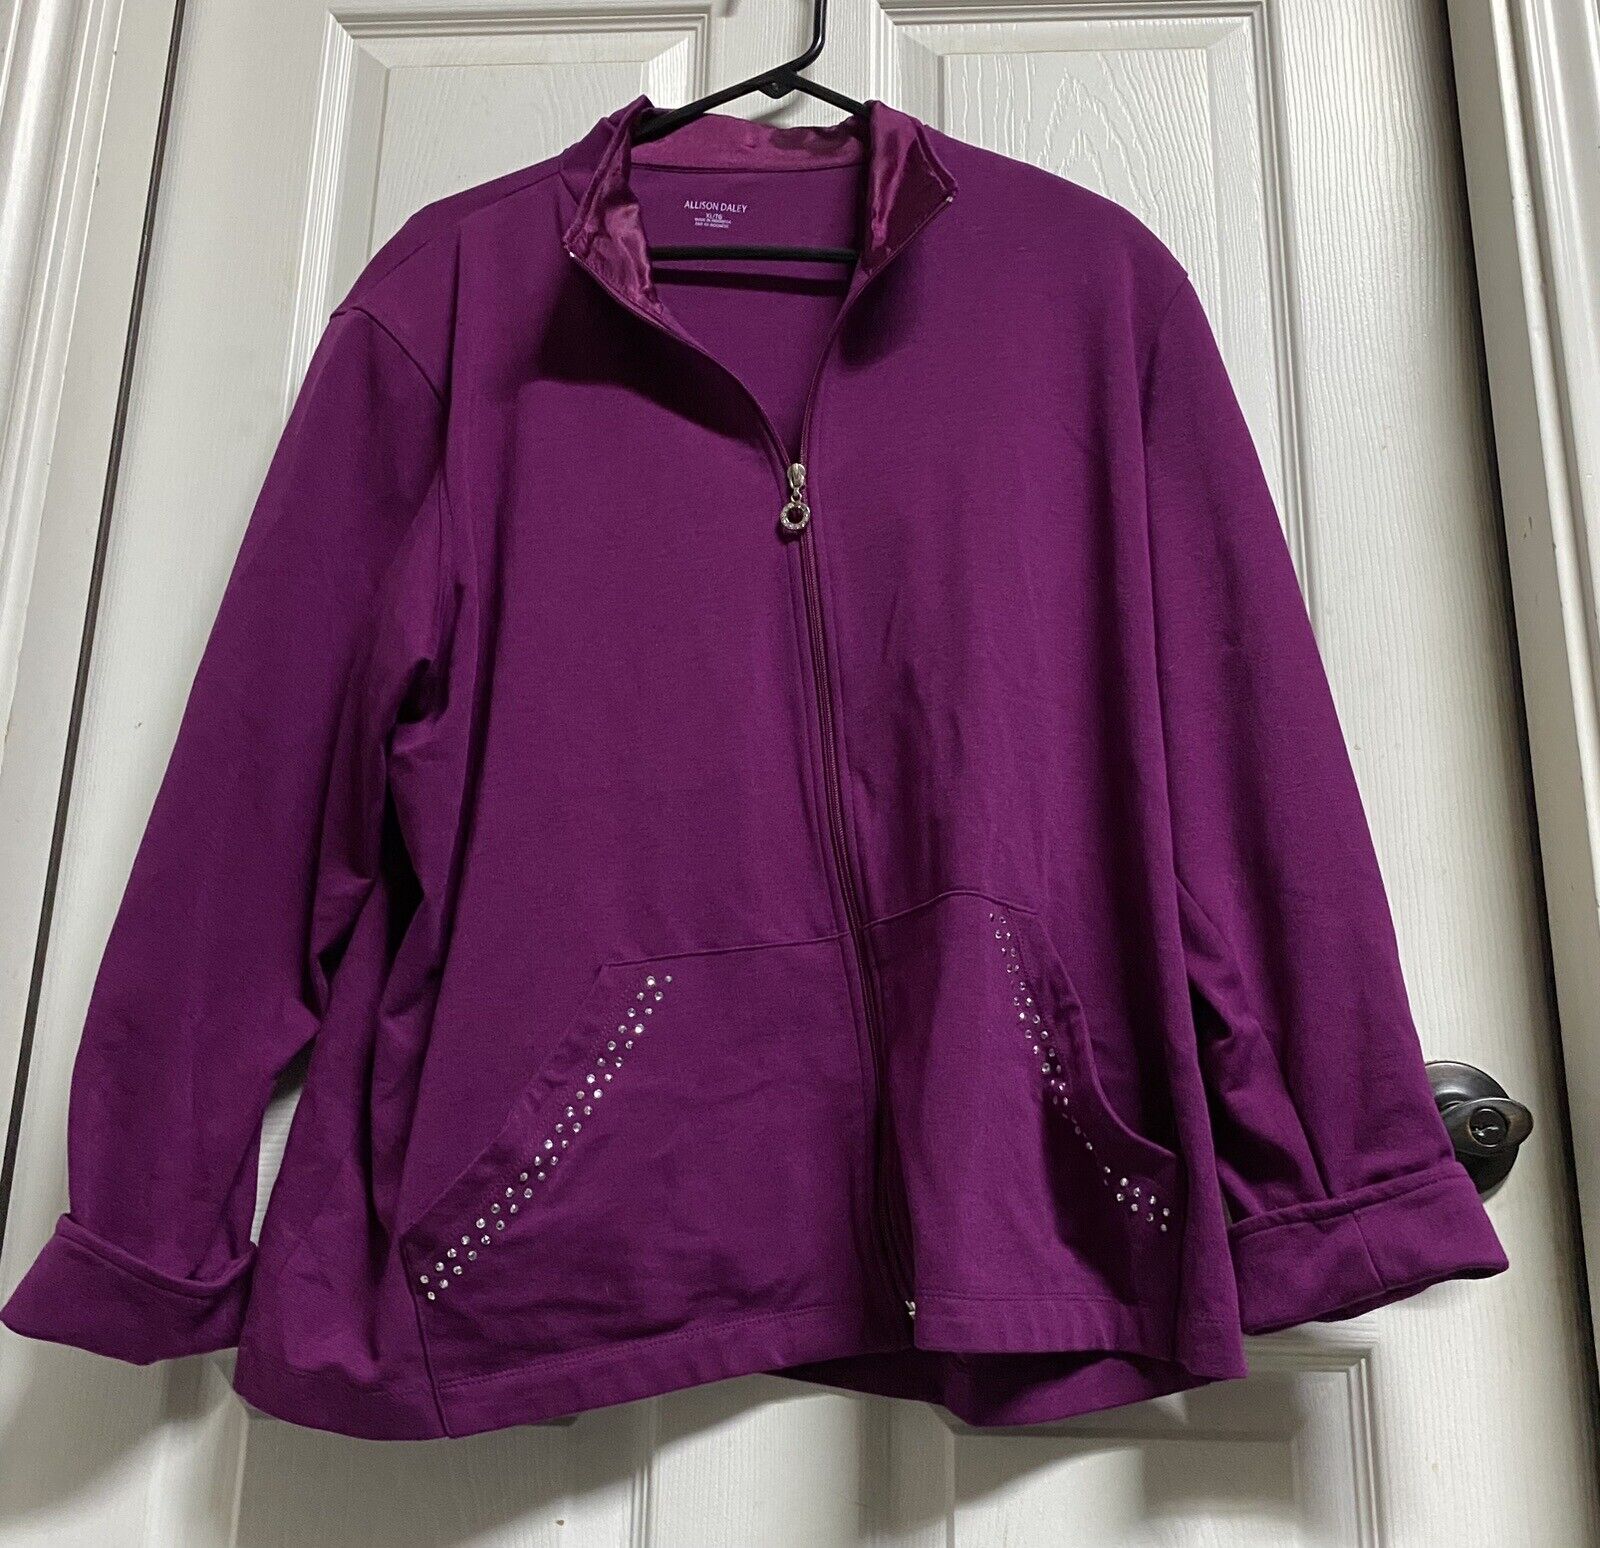 Allison Daley XL Purple Jacket With Bling - image 2